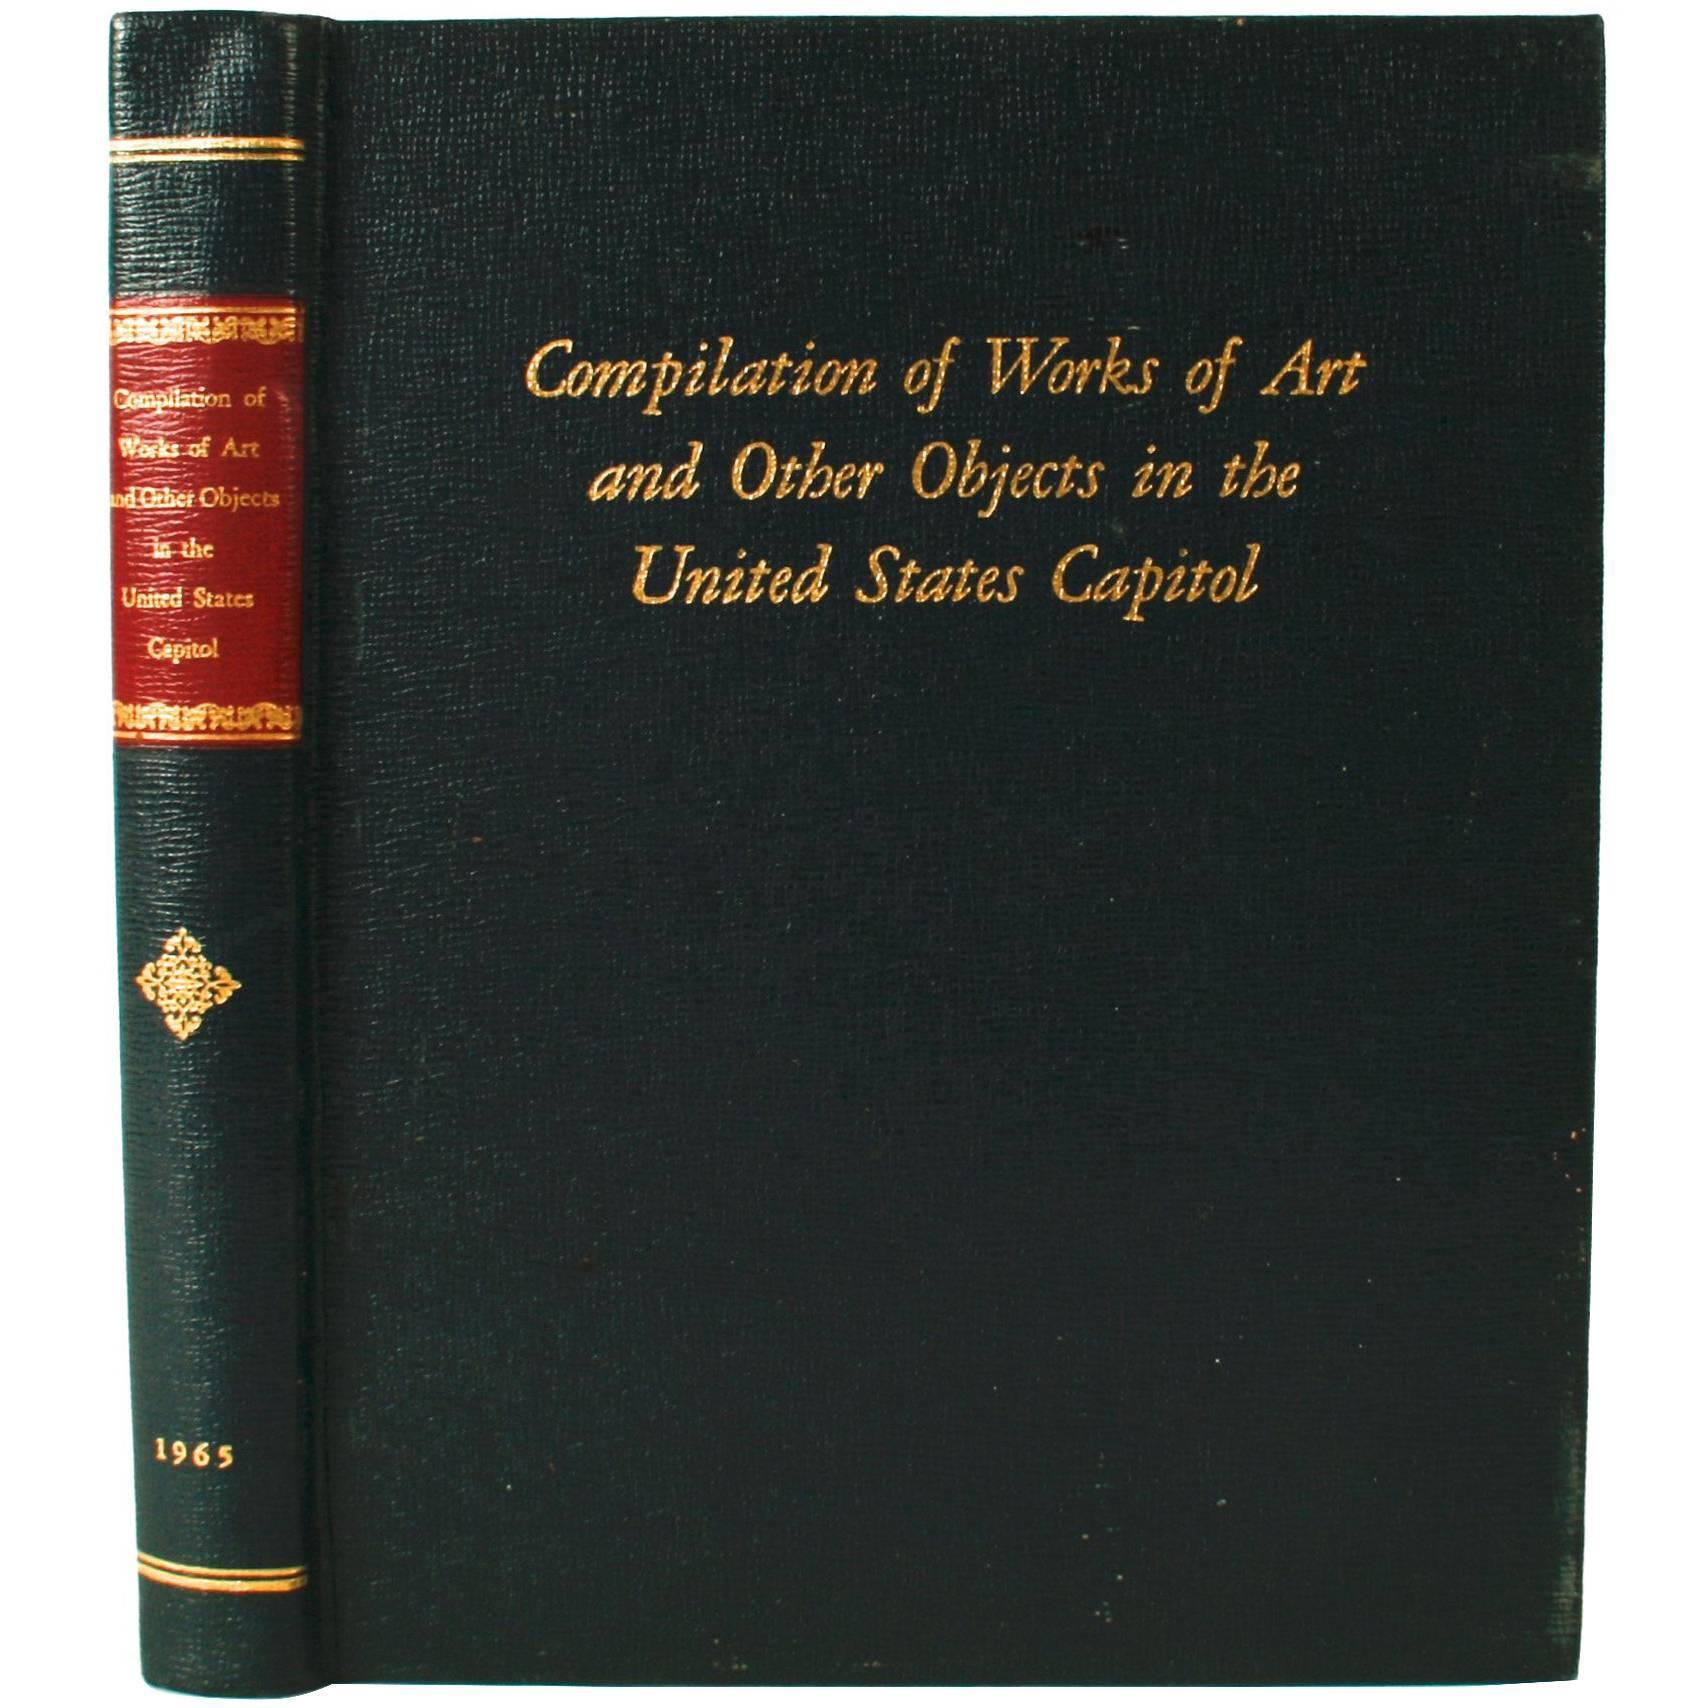 Compilation of Works of Art and Other Objects, United States Capitol, 1st Ed